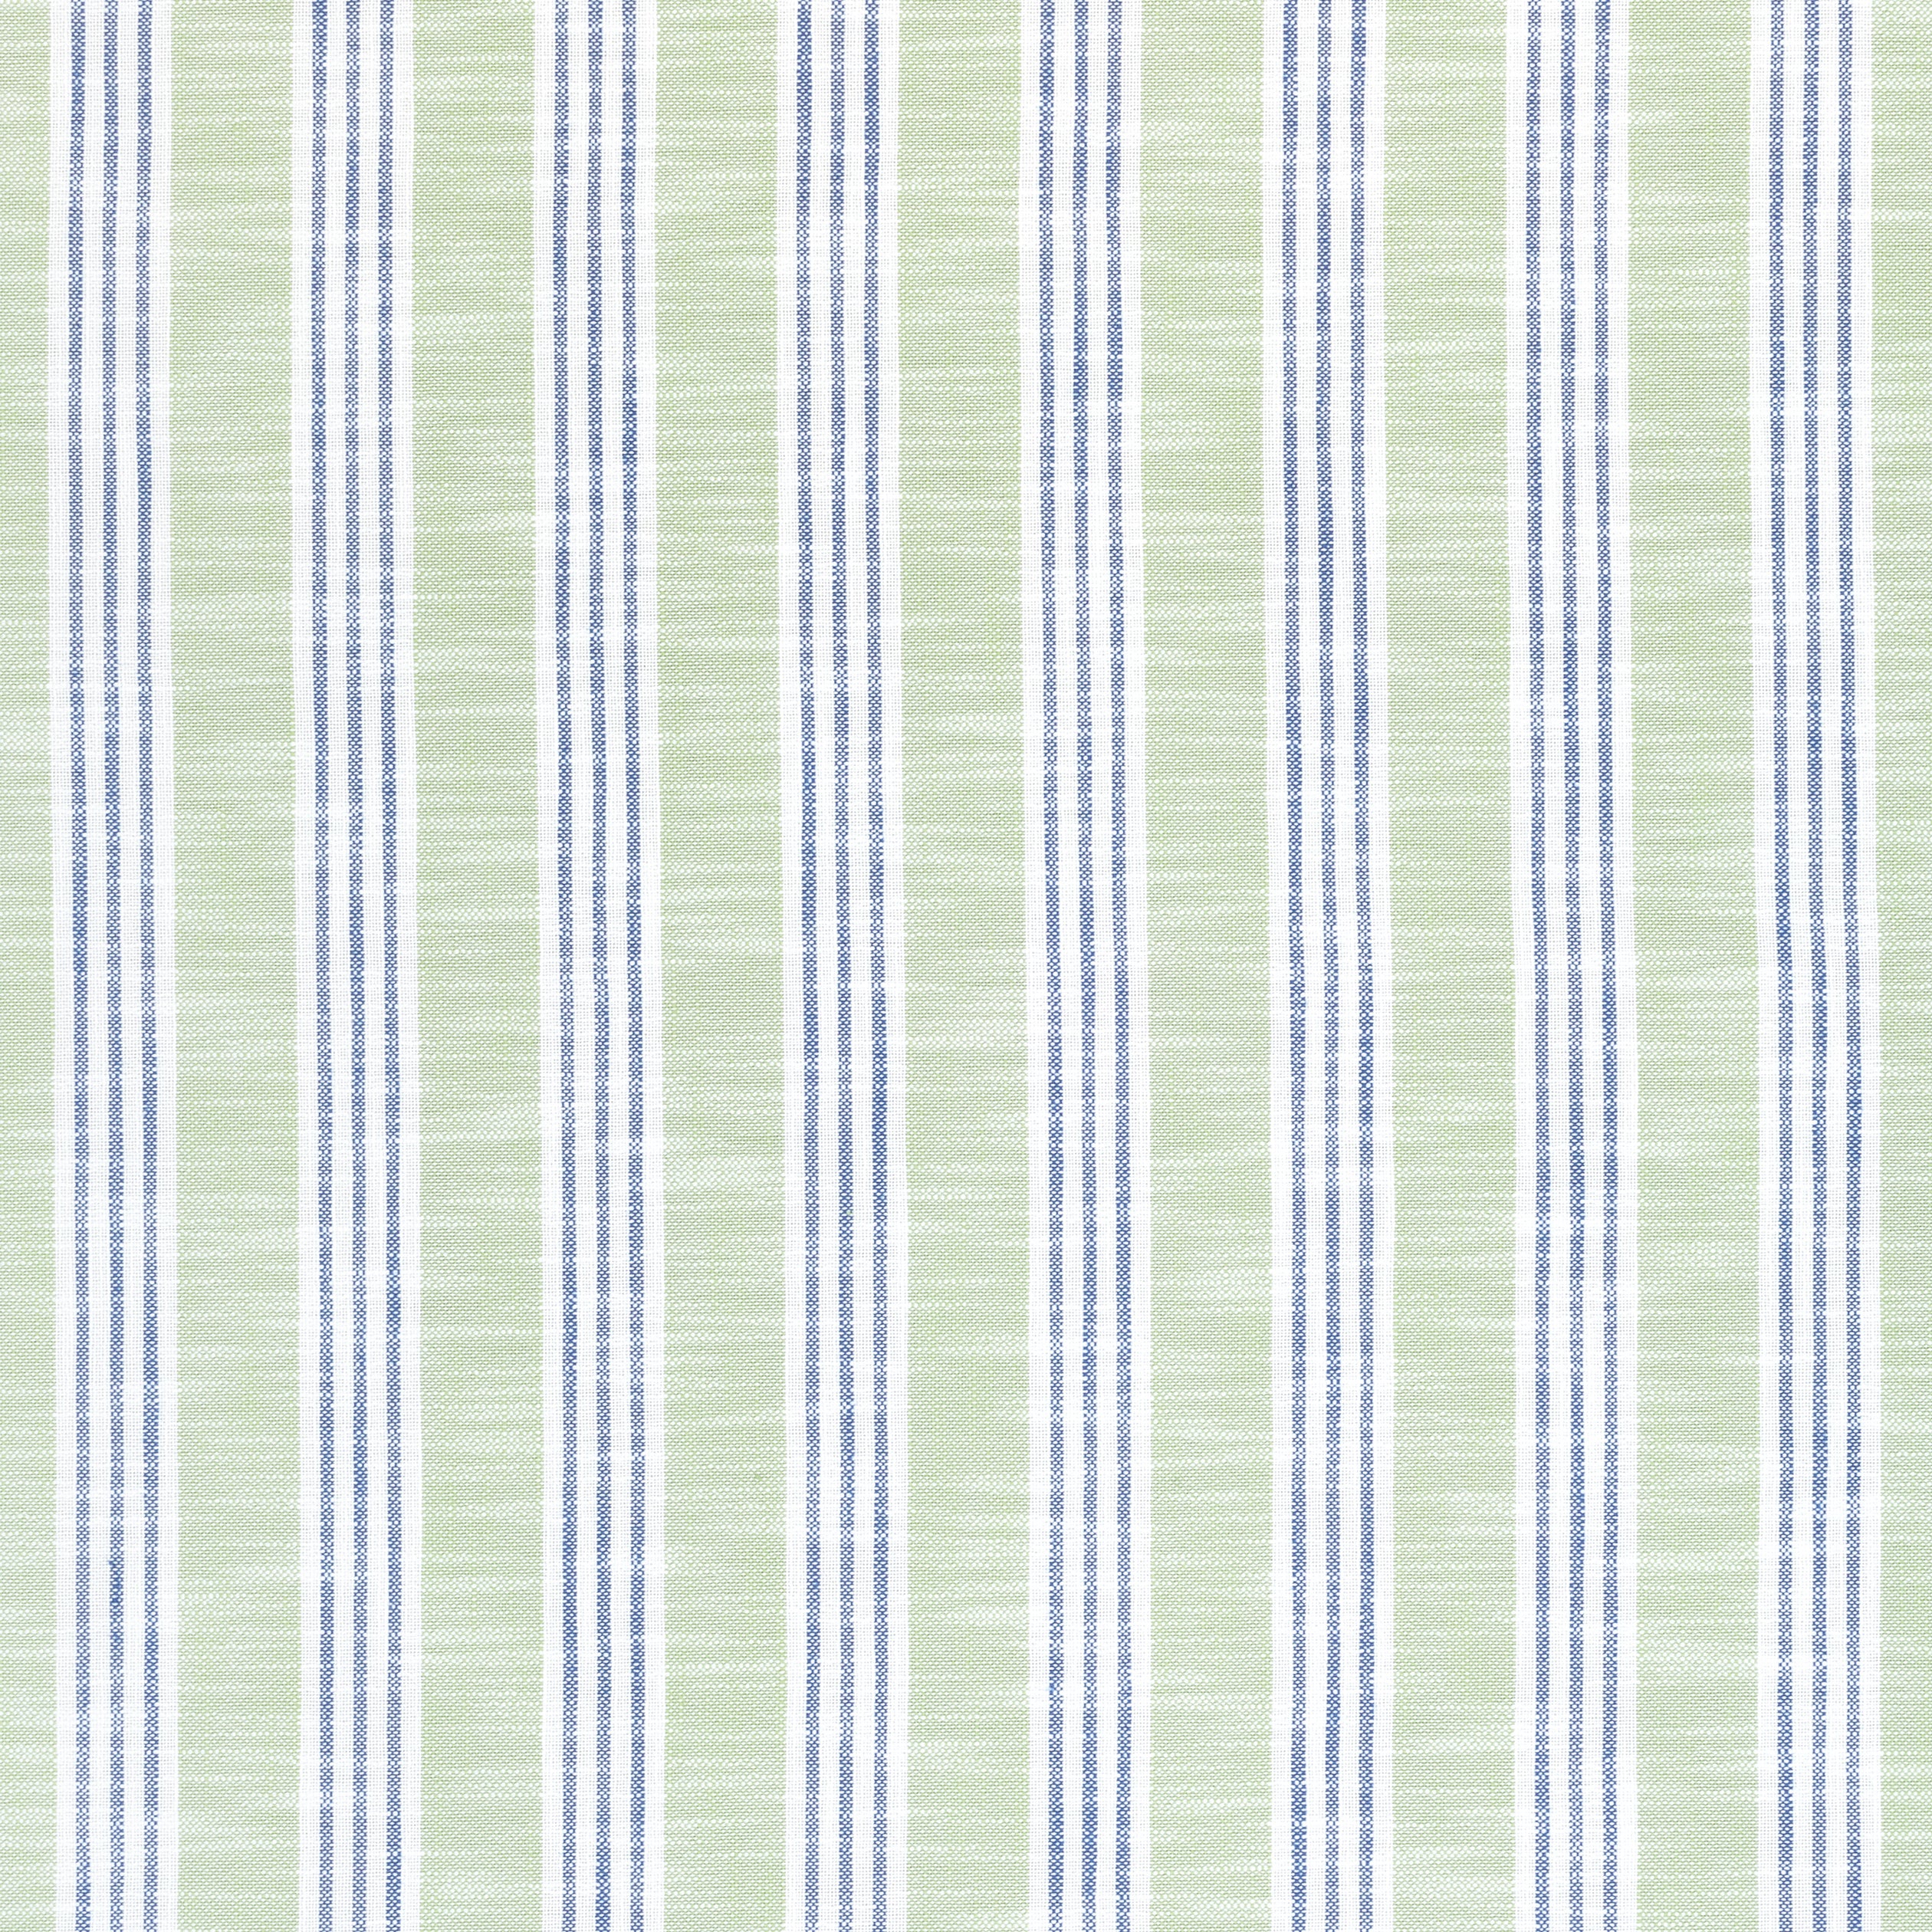 Southport Stripe fabric in green apple and royal color - pattern number W73486 - by Thibaut in the Landmark collection